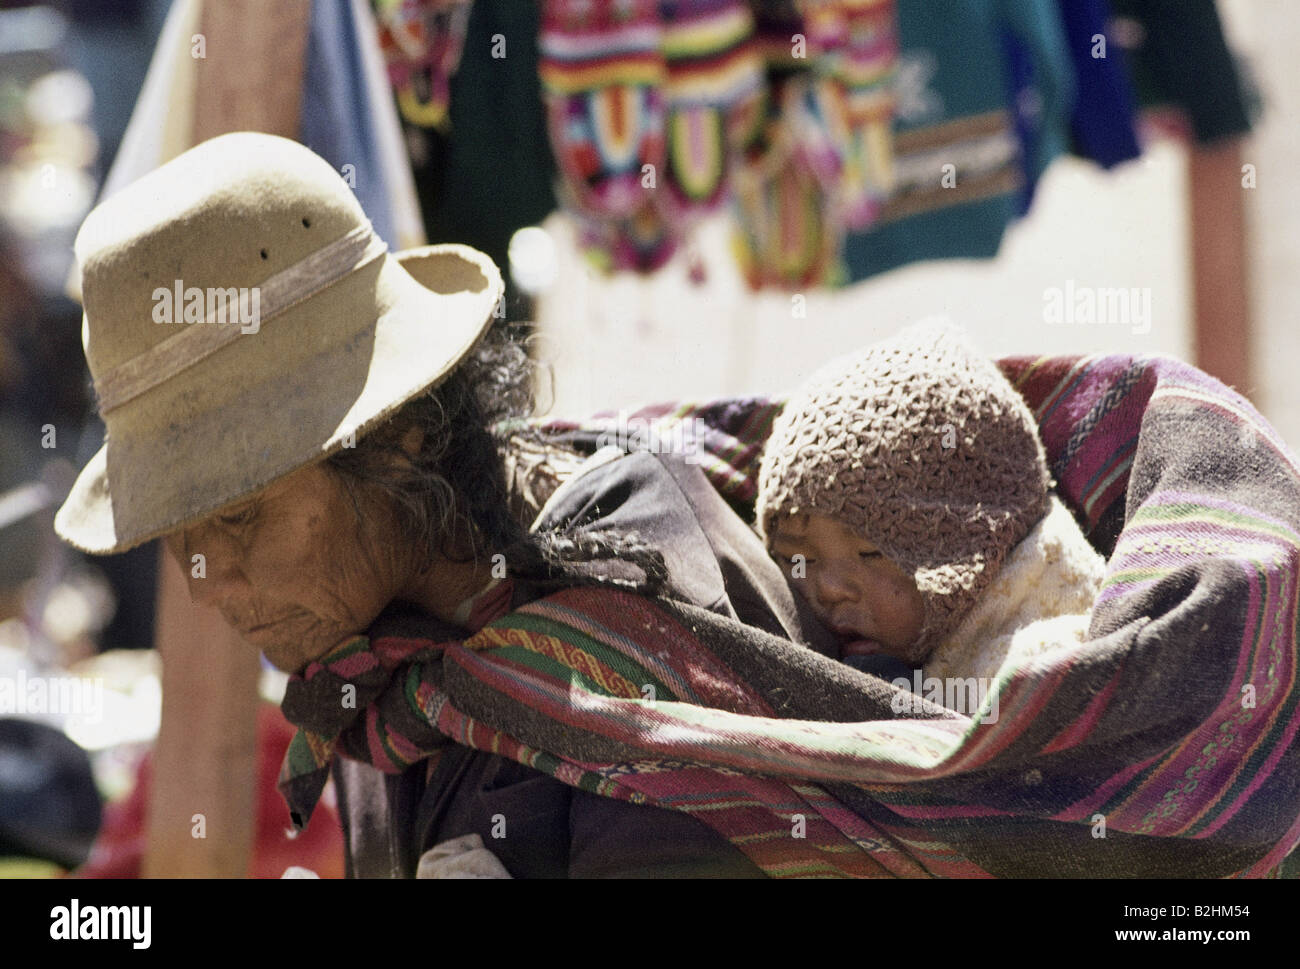 people, women with children, Peru, indigenous woman with child, Puno, Peru, mother, infant, baby, hat, baby-sling, carry-sling, Stock Photo